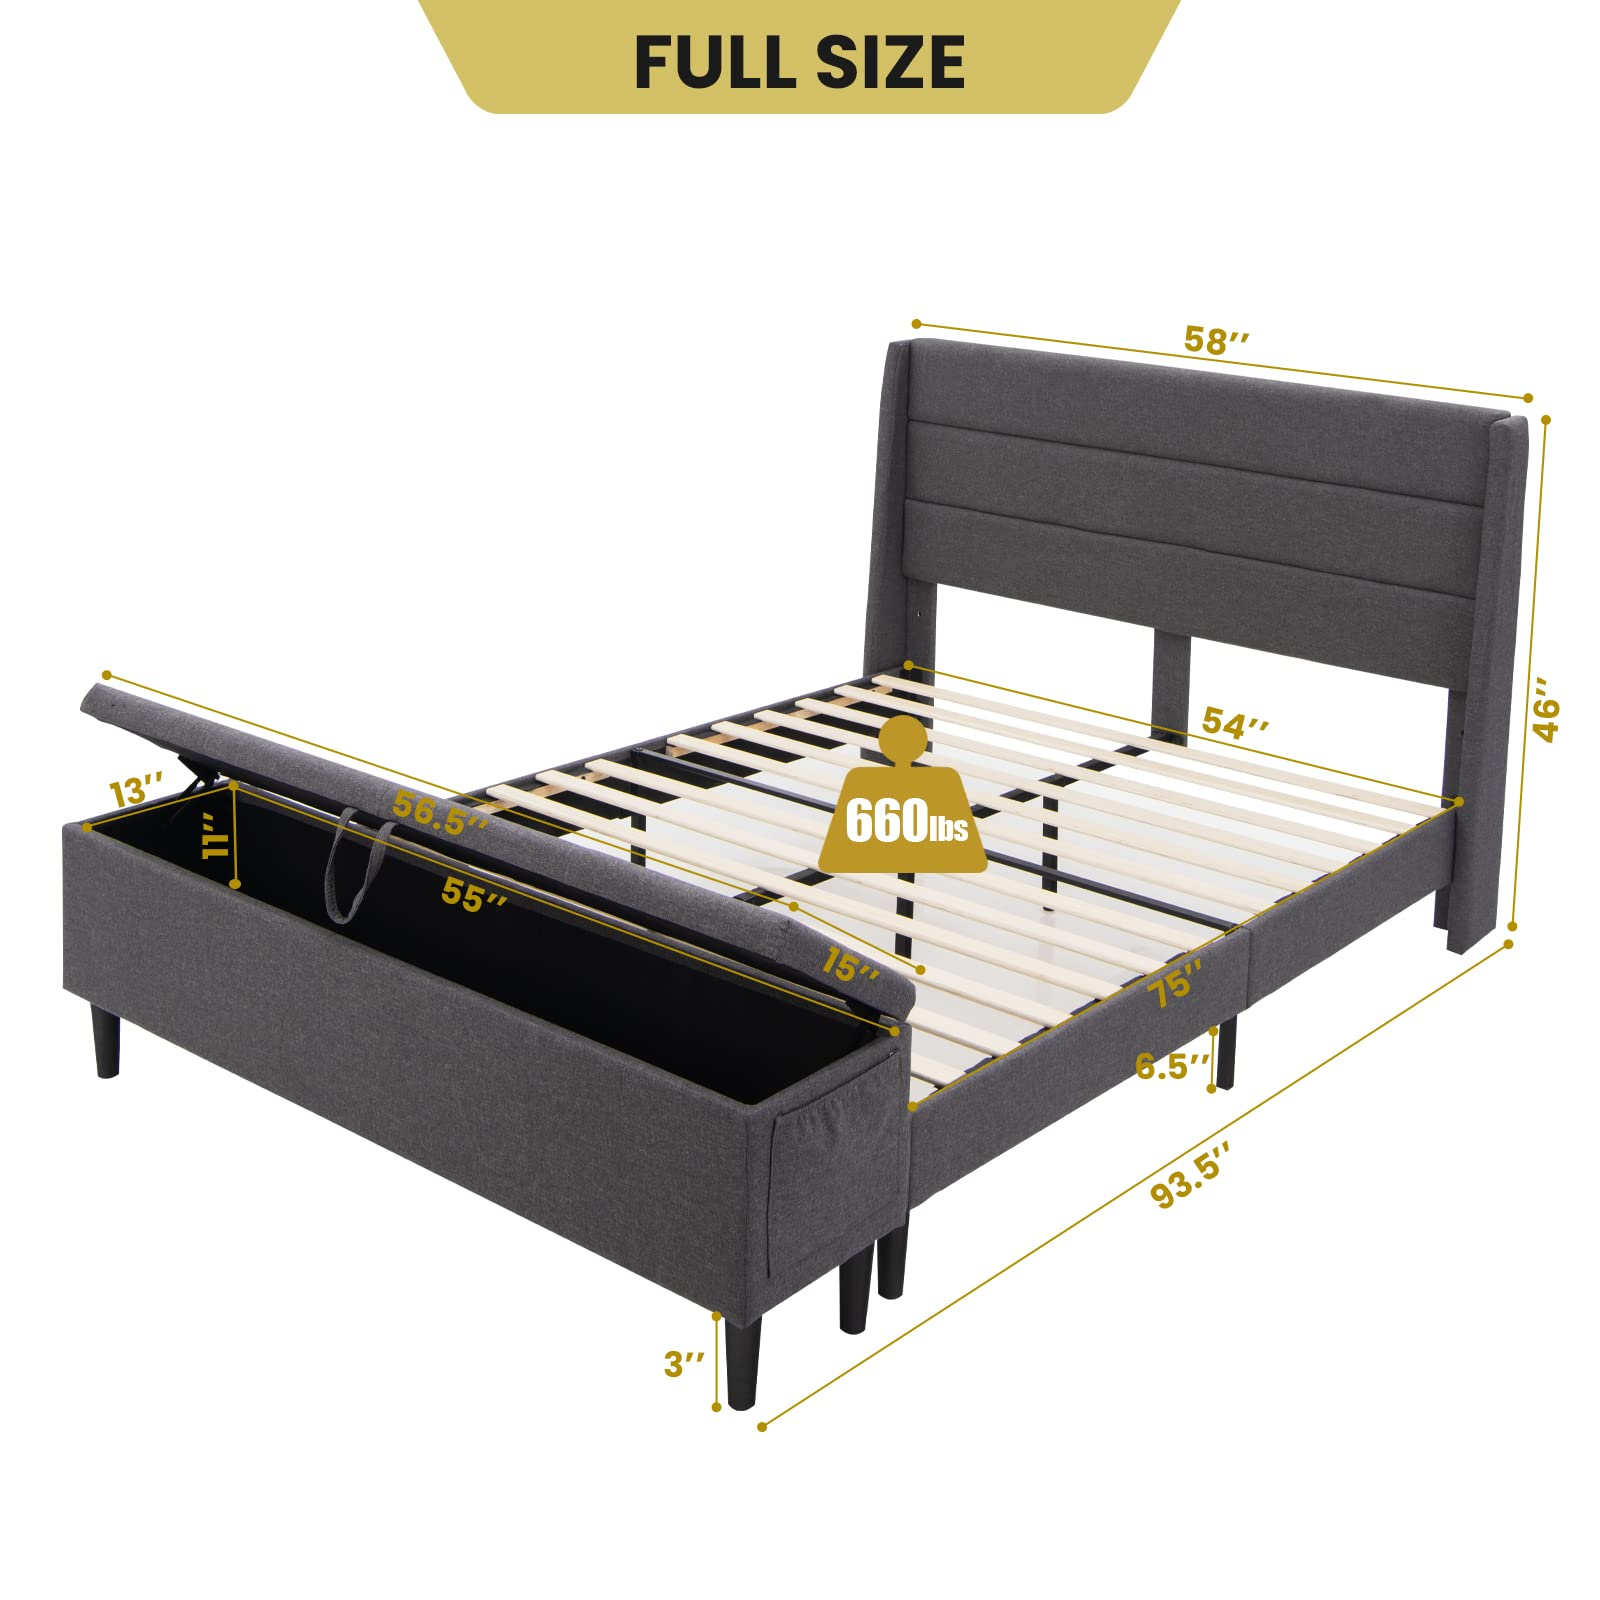 Giantex Bed Frame with Storage Ottoman